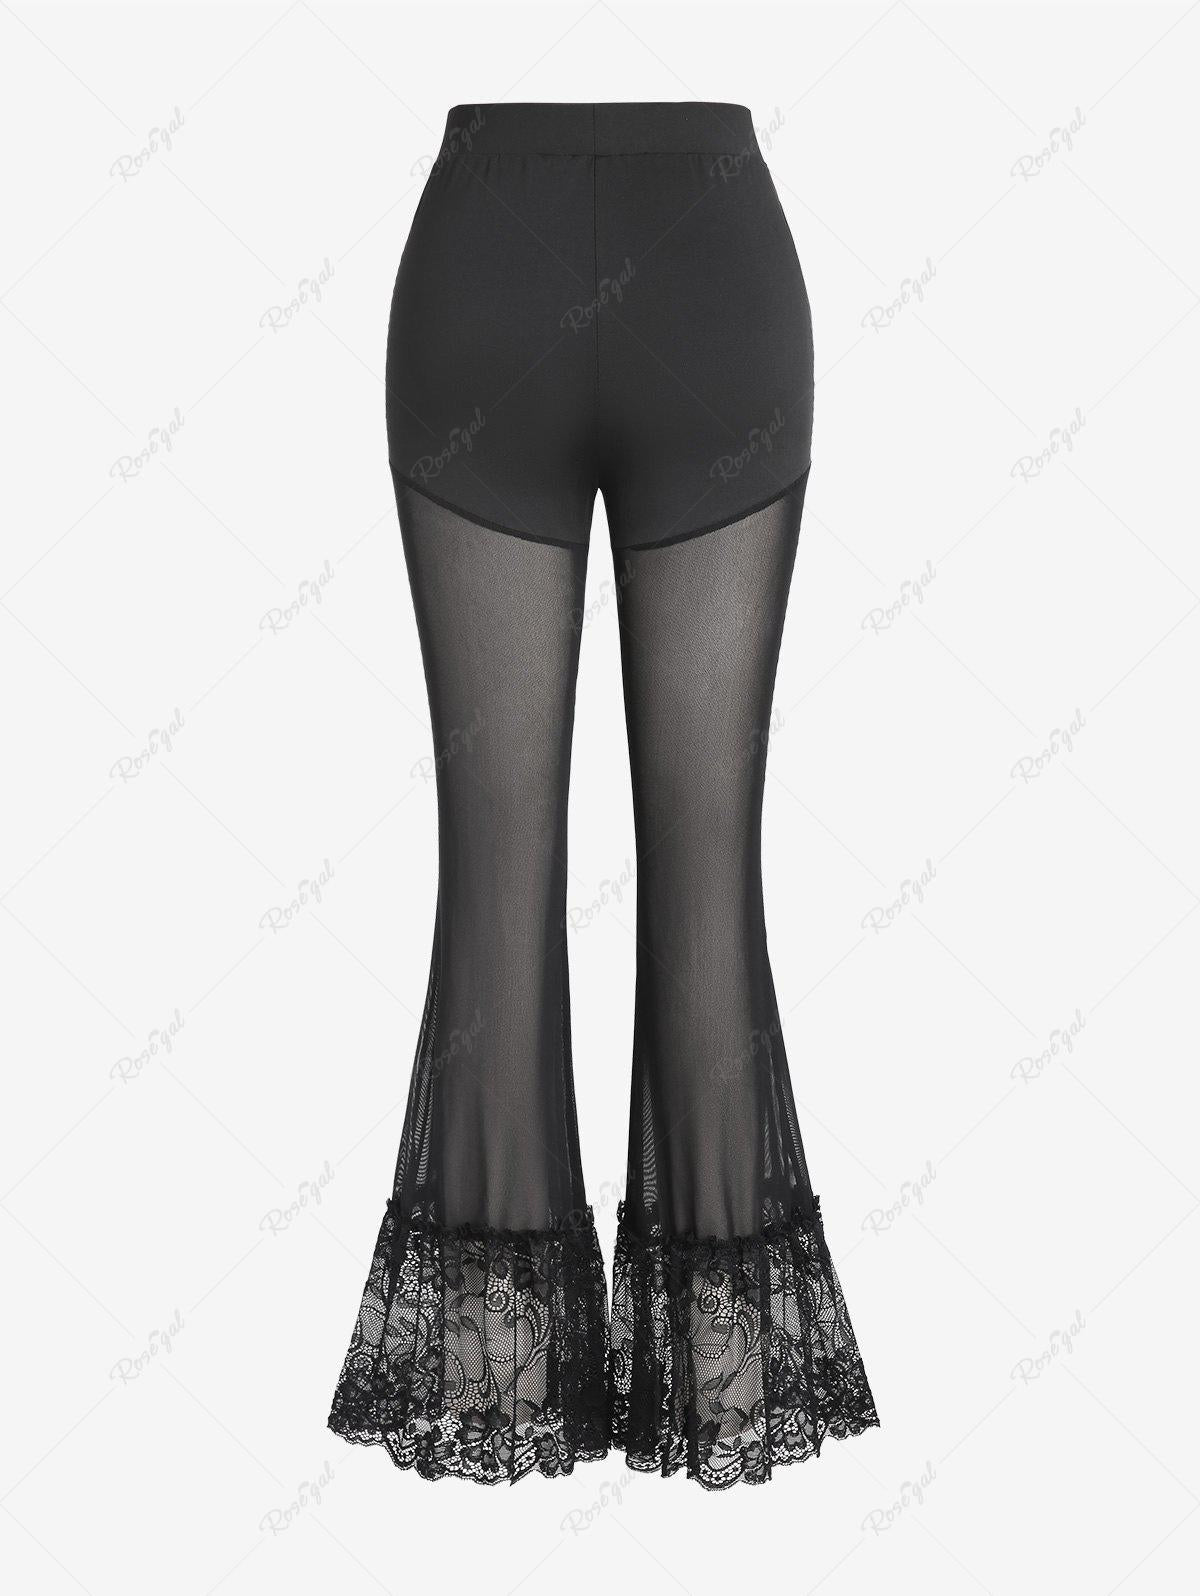 💗Johana Loves💗 Gothic See Through Mesh Panel Lace Lace-up Flare